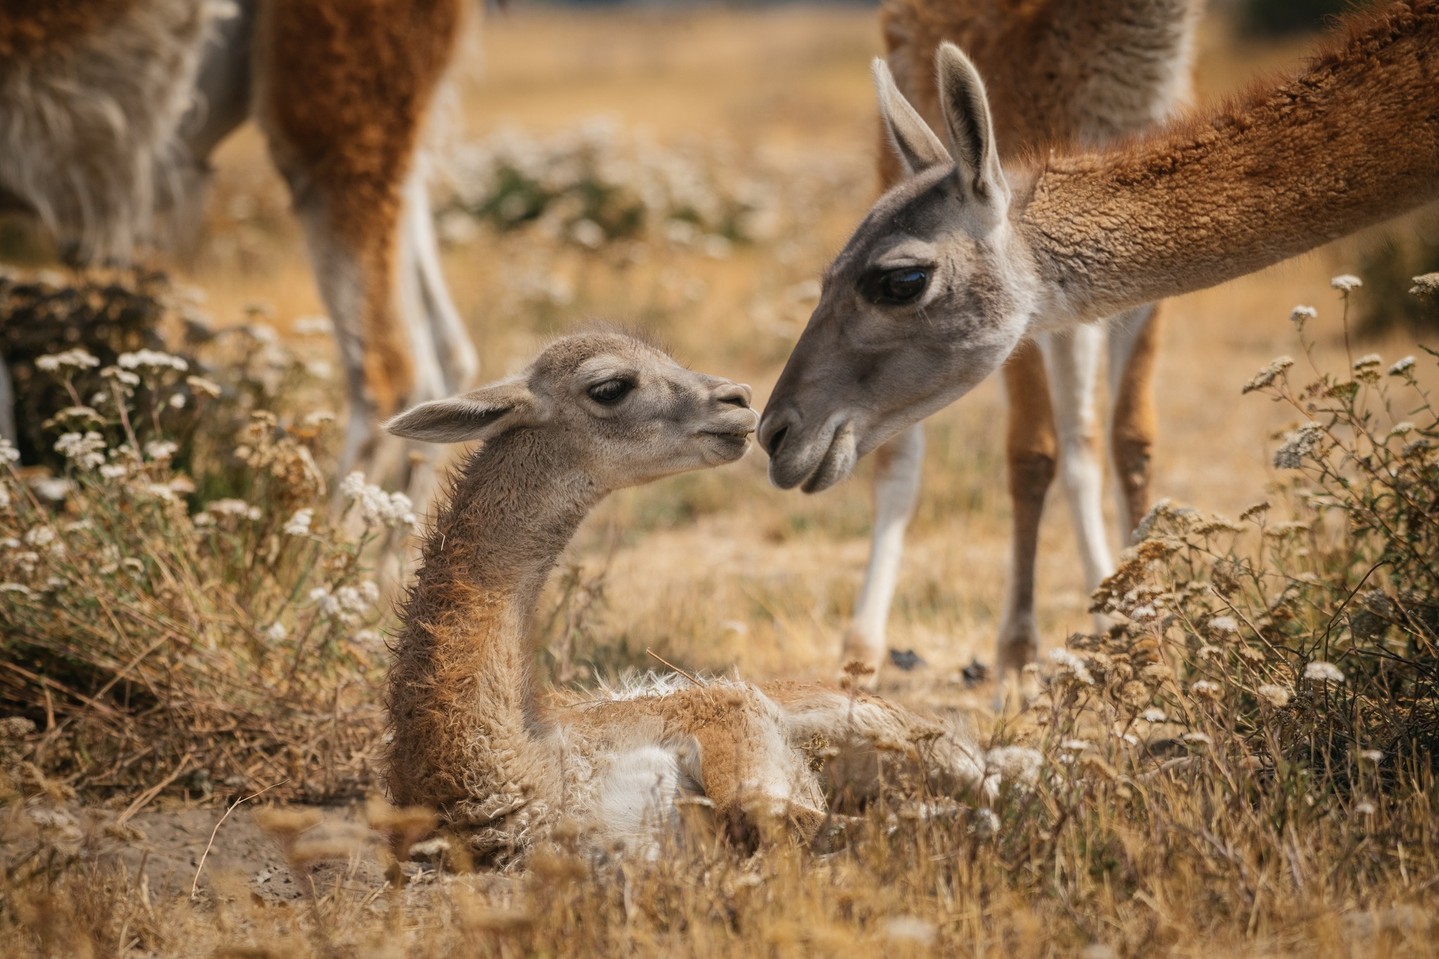 Photo by kiliiiyuyan | A young guanaco—also known as a chulengo—